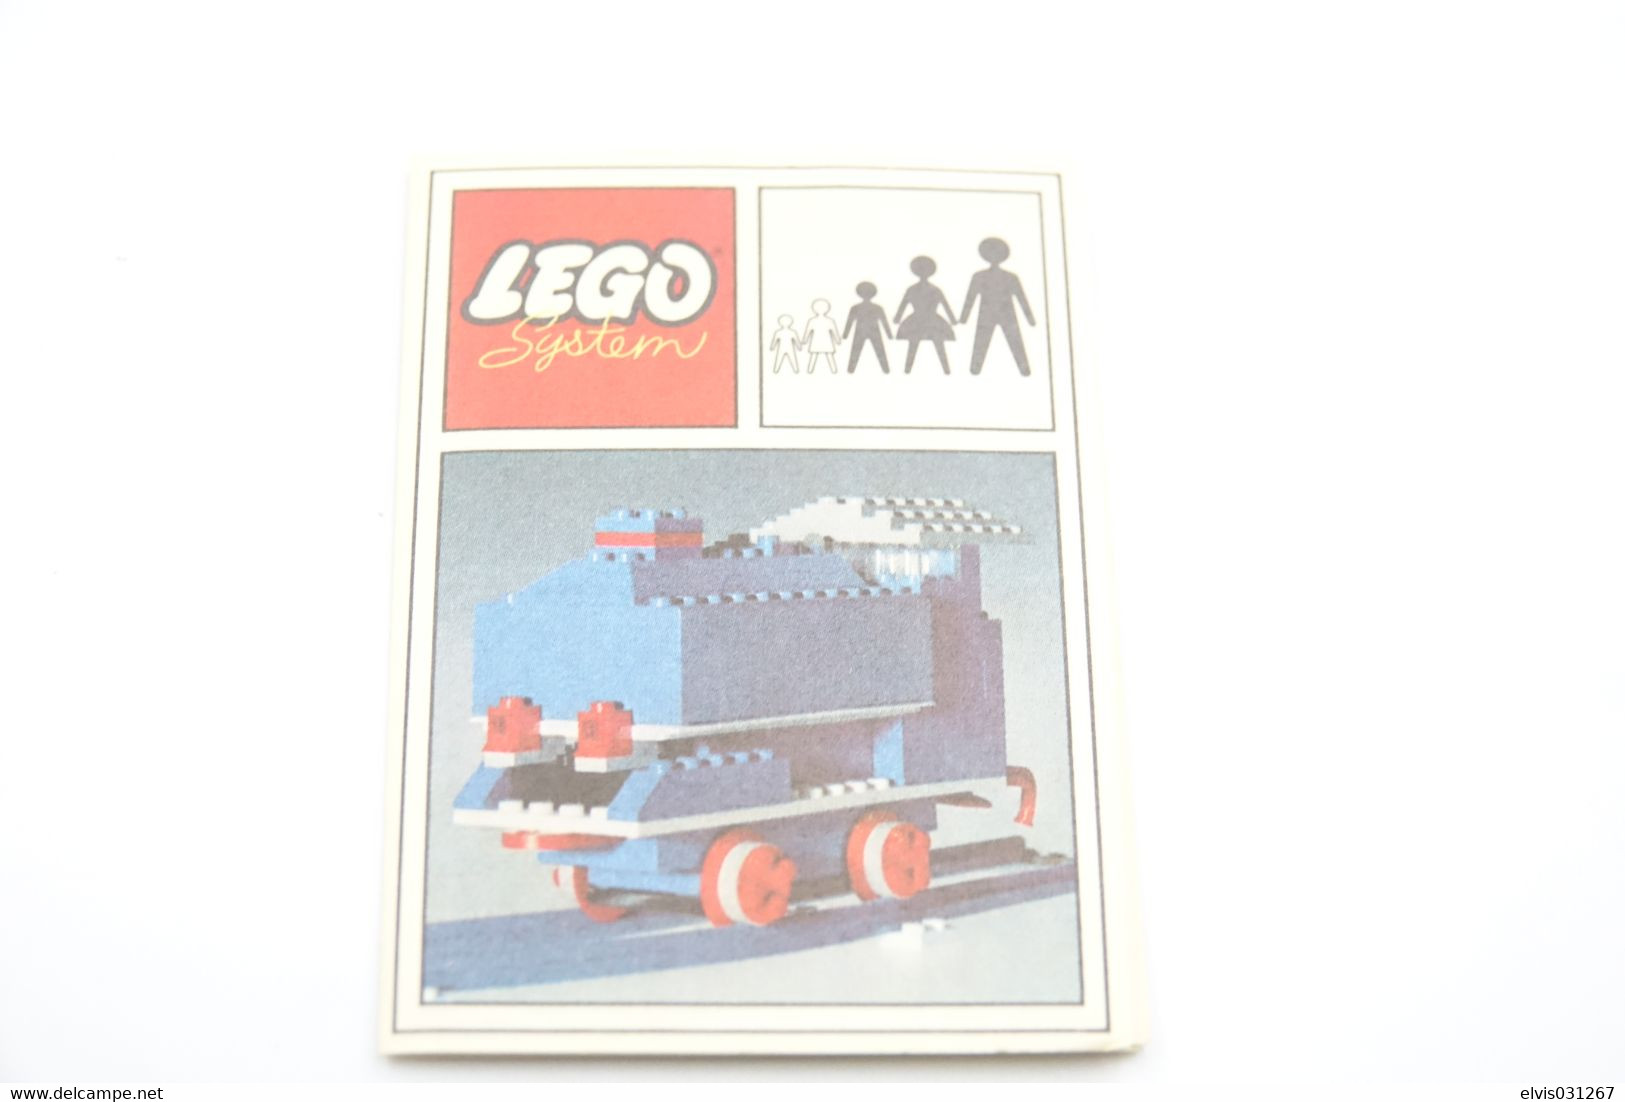 LEGO - 403-2 Train Couplers and Wheels (The Building Toy) - collector item - Original Lego 1967 - Vintage